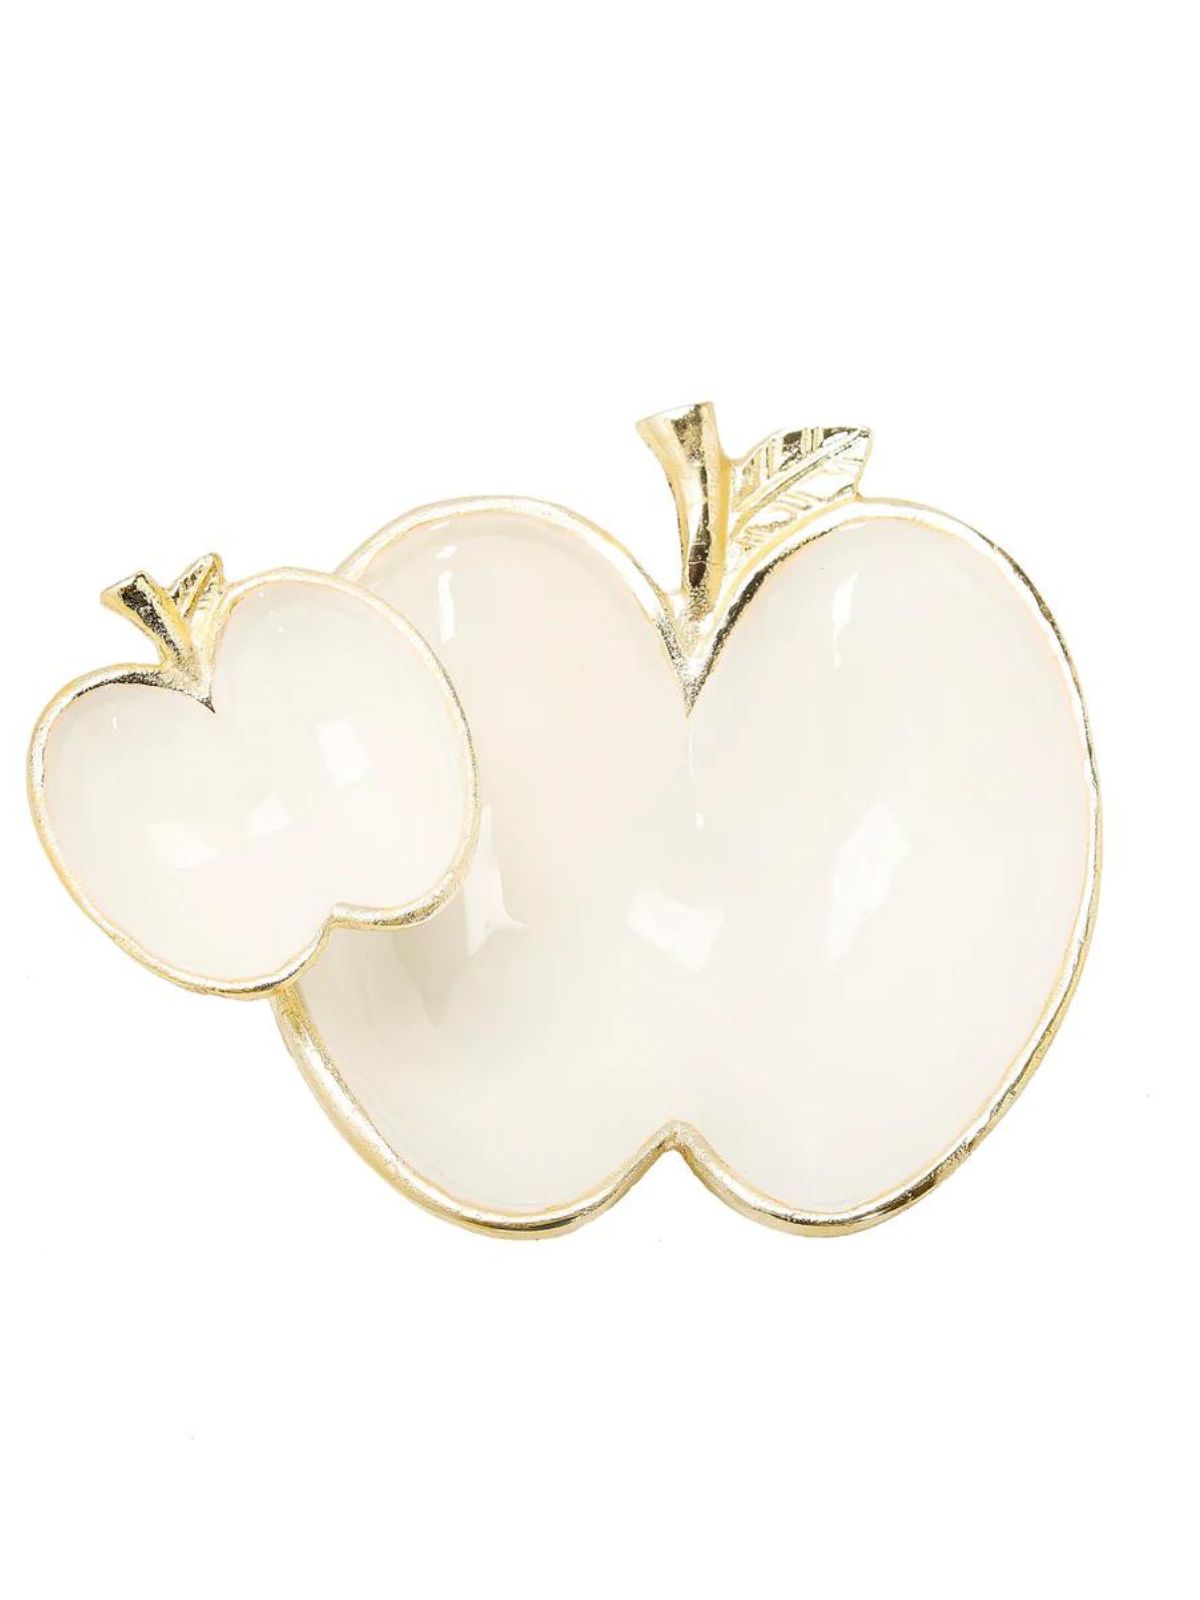 Two Apple Shaped Gold Dish with White Enamel Inner, Top View.